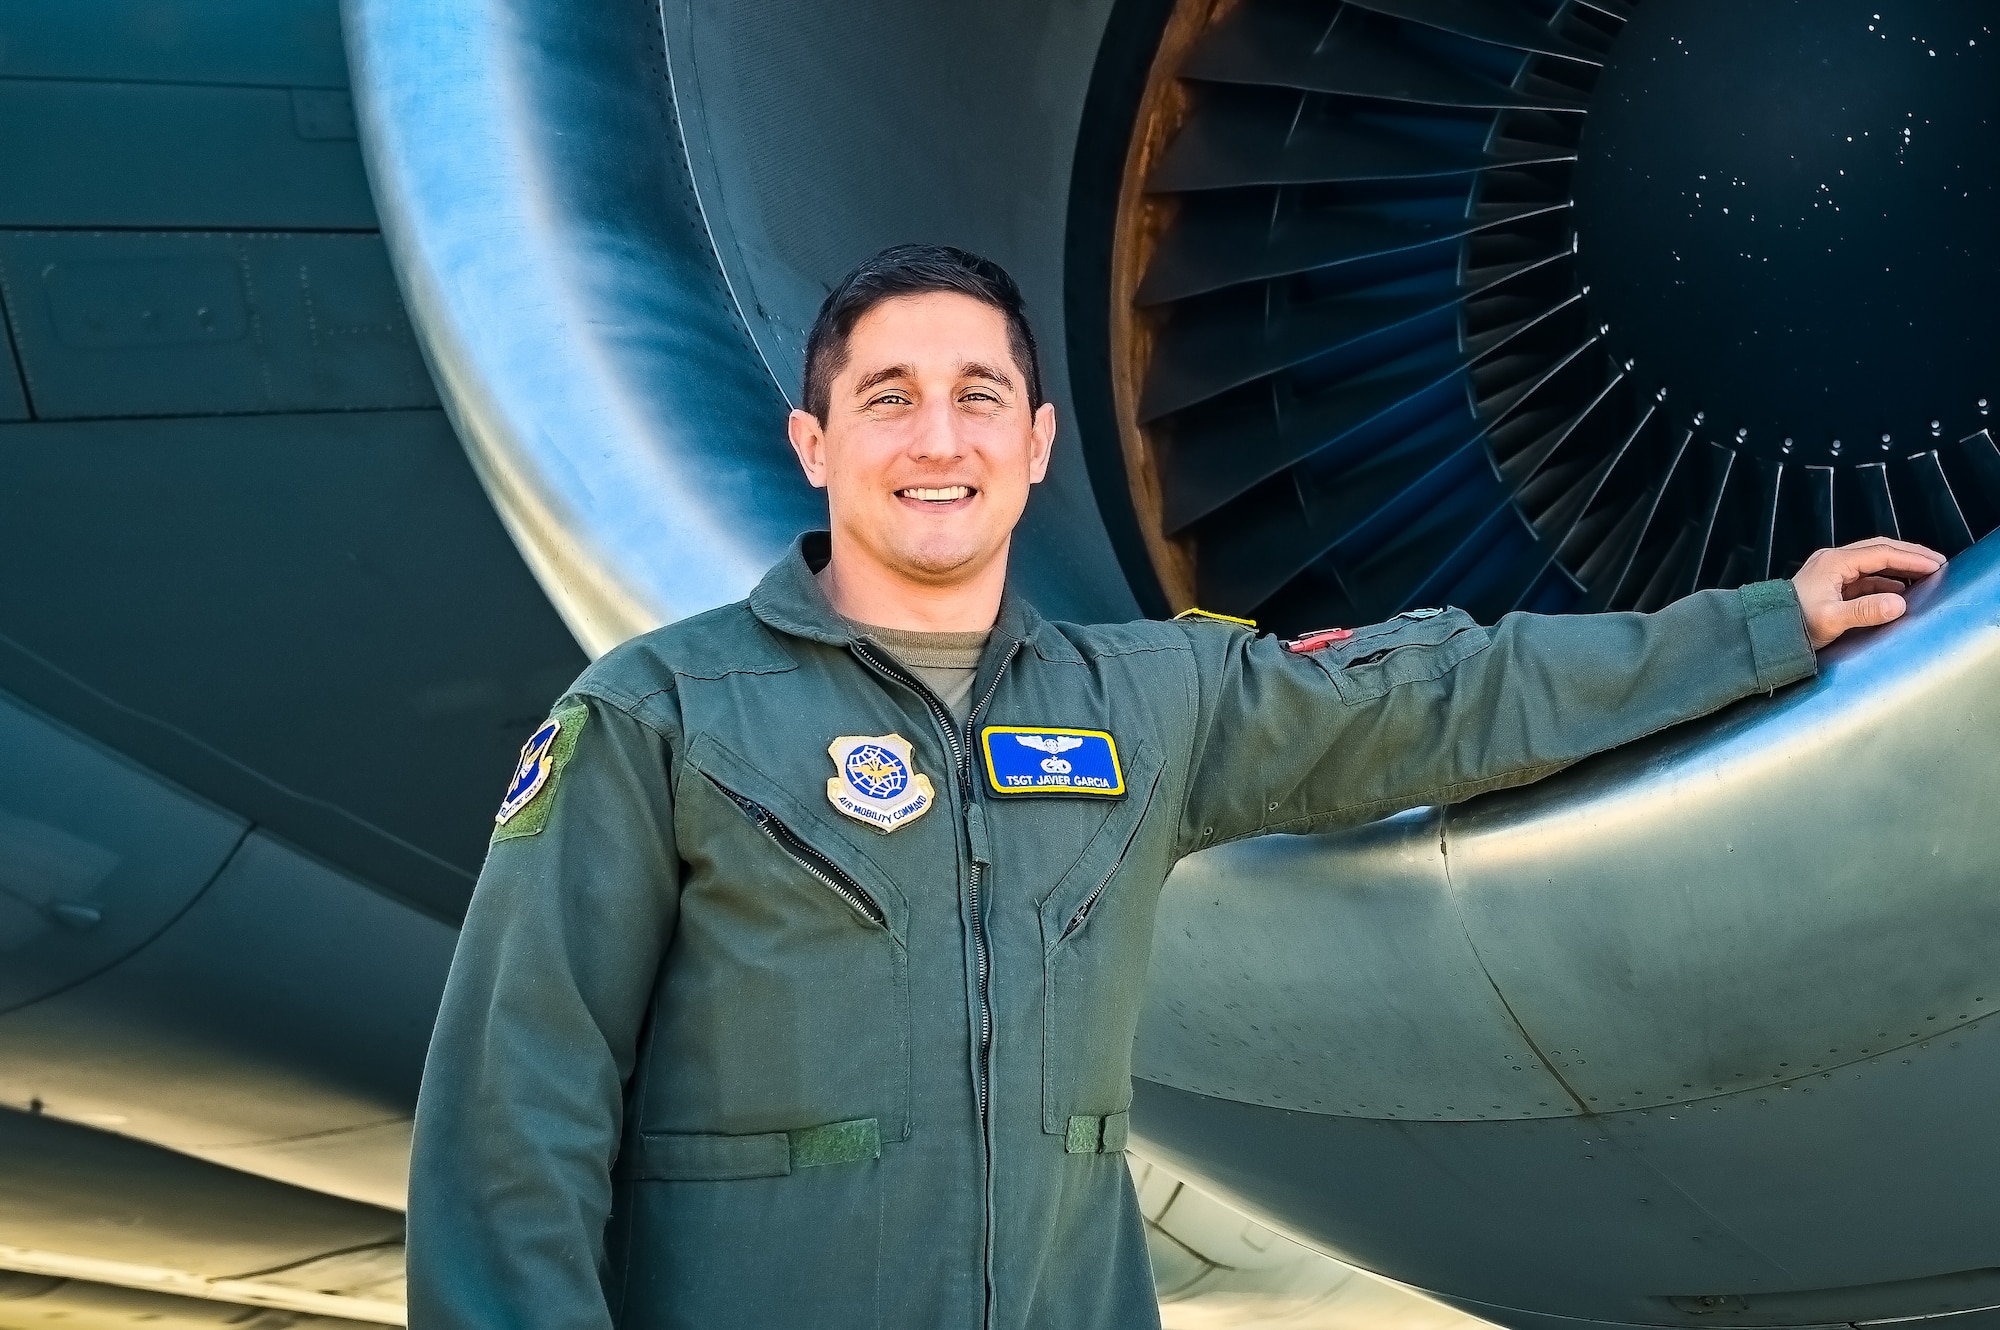 U.S. Air Force Tech. Sgt. Javier Garcia, 305th Air Mobility Wing boom operator, poses for a flight line photo on 11 May, 2023 at Joint Base McGuire-Dix-Lakehurst, N.J. Garcia is a part of the last crew to fly a local KC-10 Extender sortie from the 305th AMW. The 305th AMW extends America's global reach by generating, mobilizing and deploying KC-10 Extenders and C-17 Globemaster III’s to conduct strategic airlift and air refueling missions worldwide. In November 2021, the Wing began transitioning to the new KC-46A Pegasus air refueling aircraft.